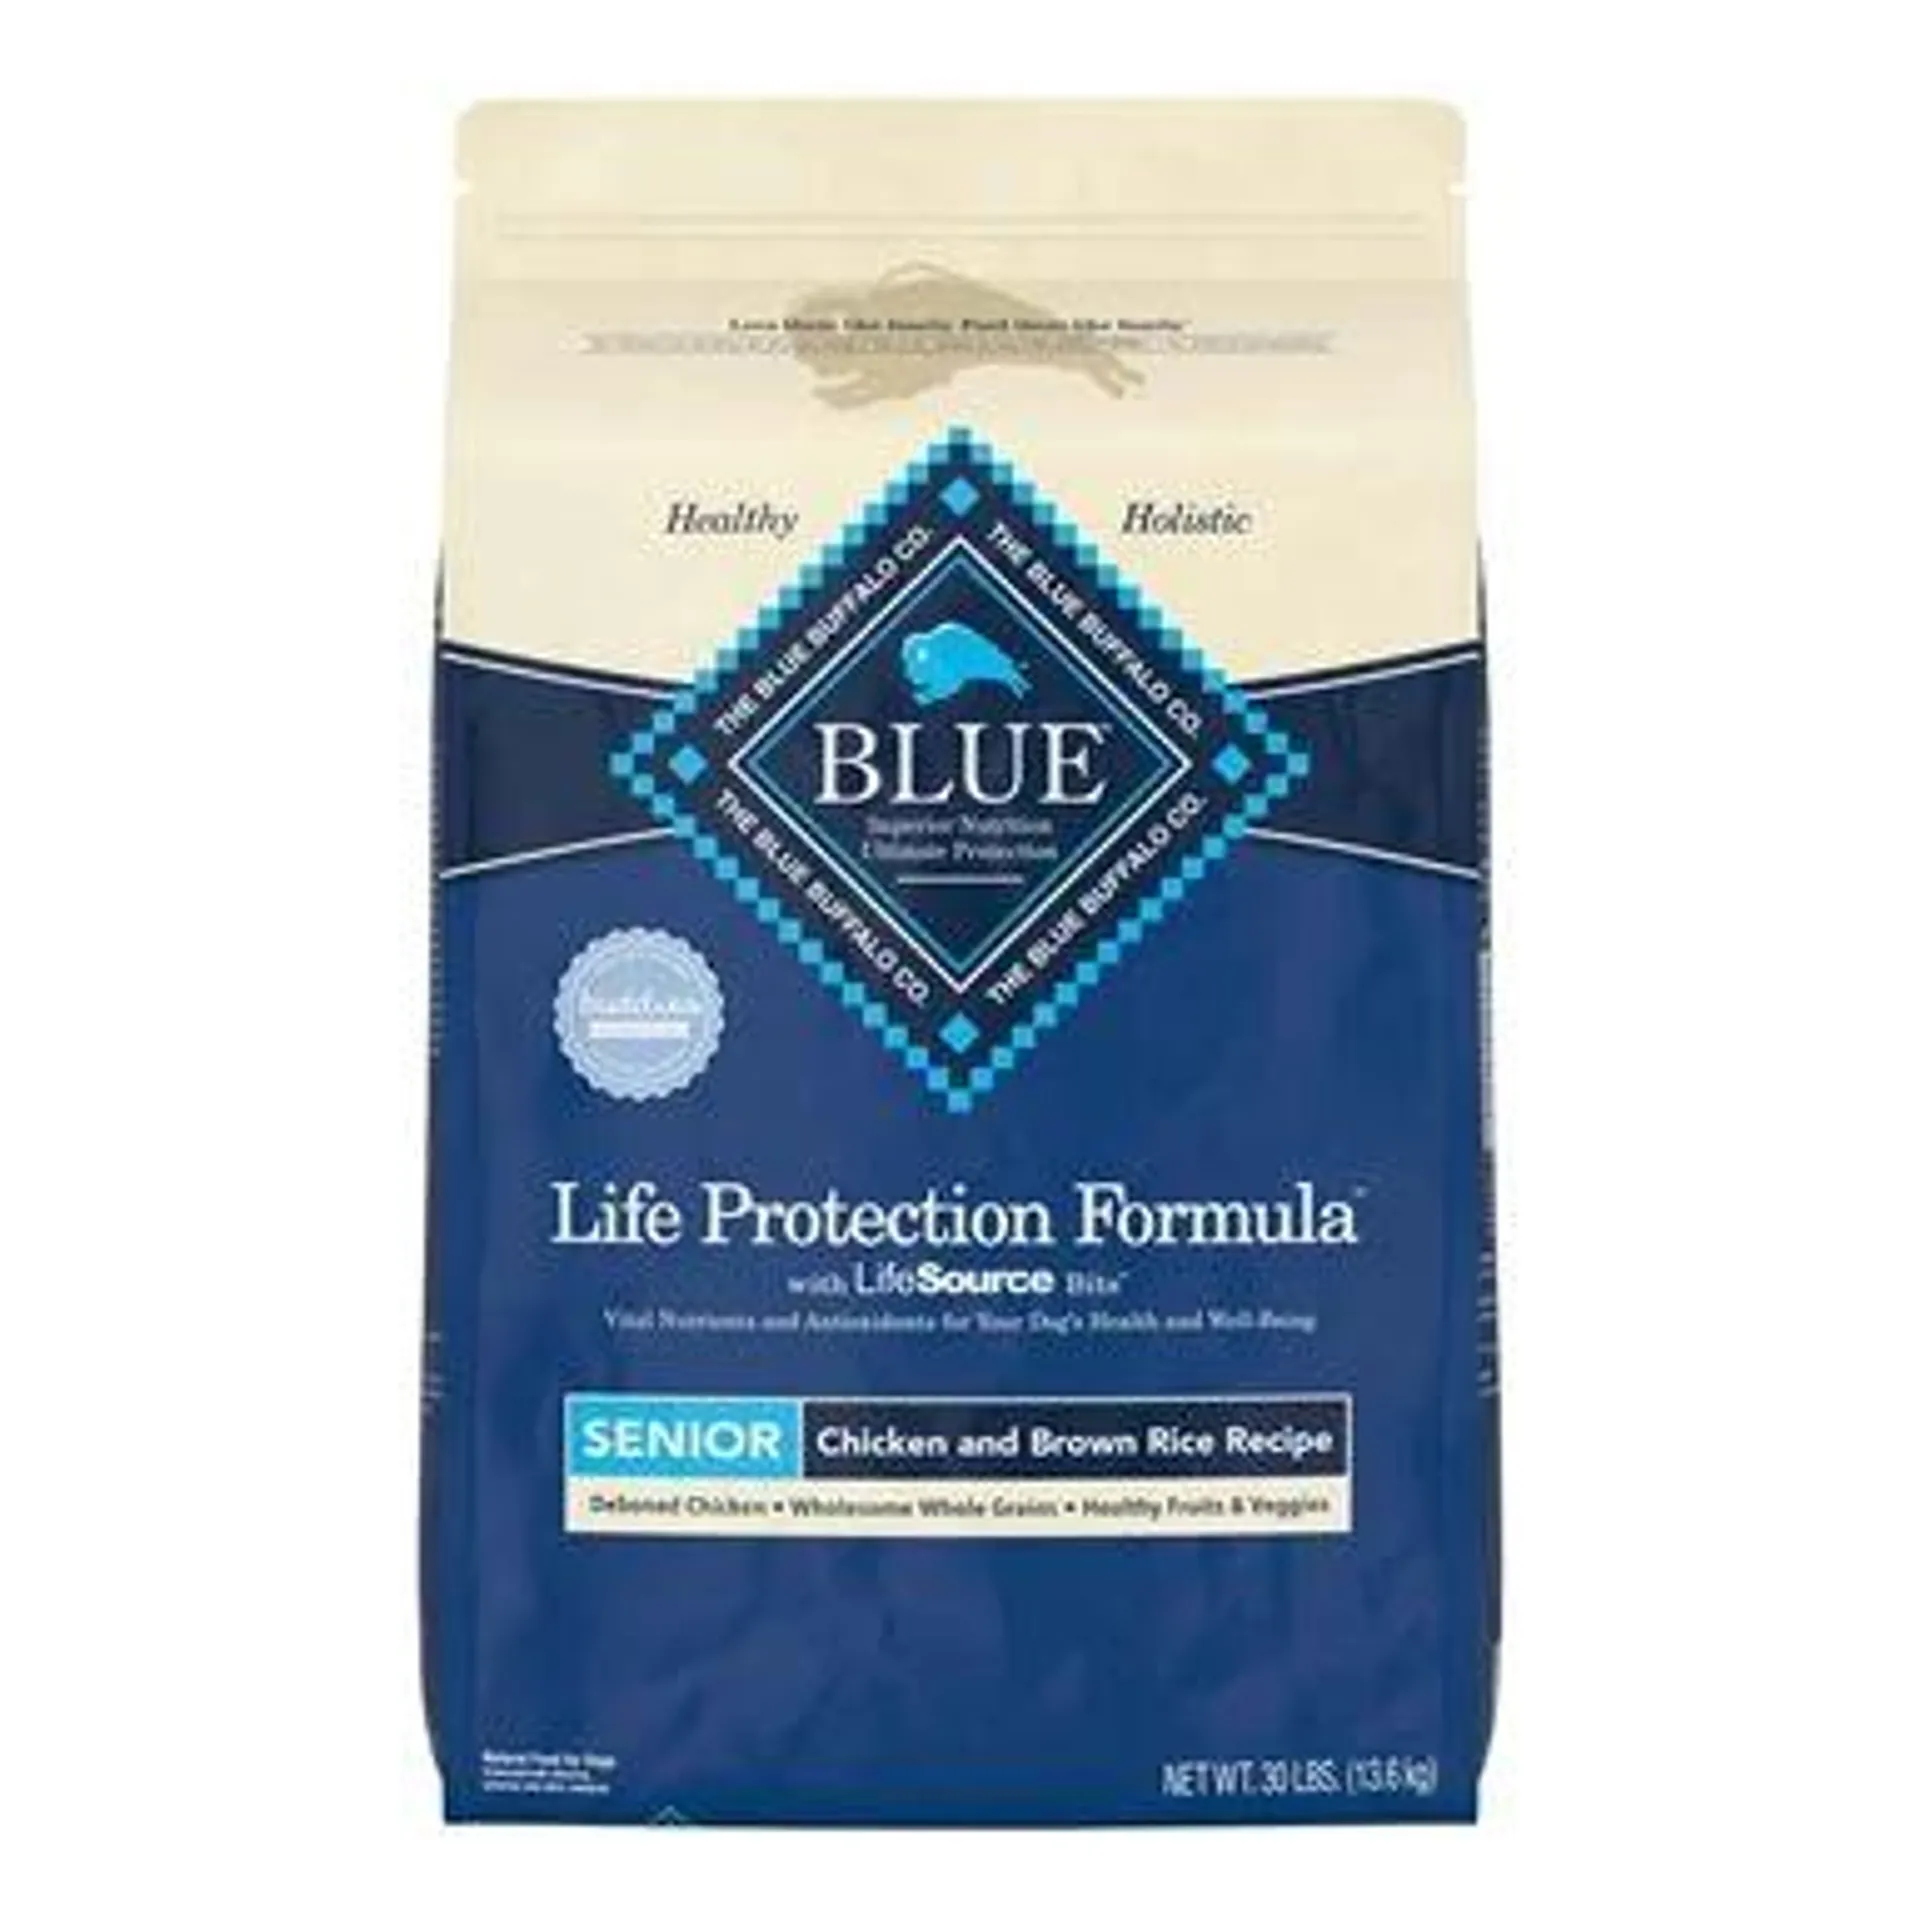 Blue Buffalo Life Protection Formula Natural Senior Dry Dog Food, Chicken and Brown Rice, 30 Pounds